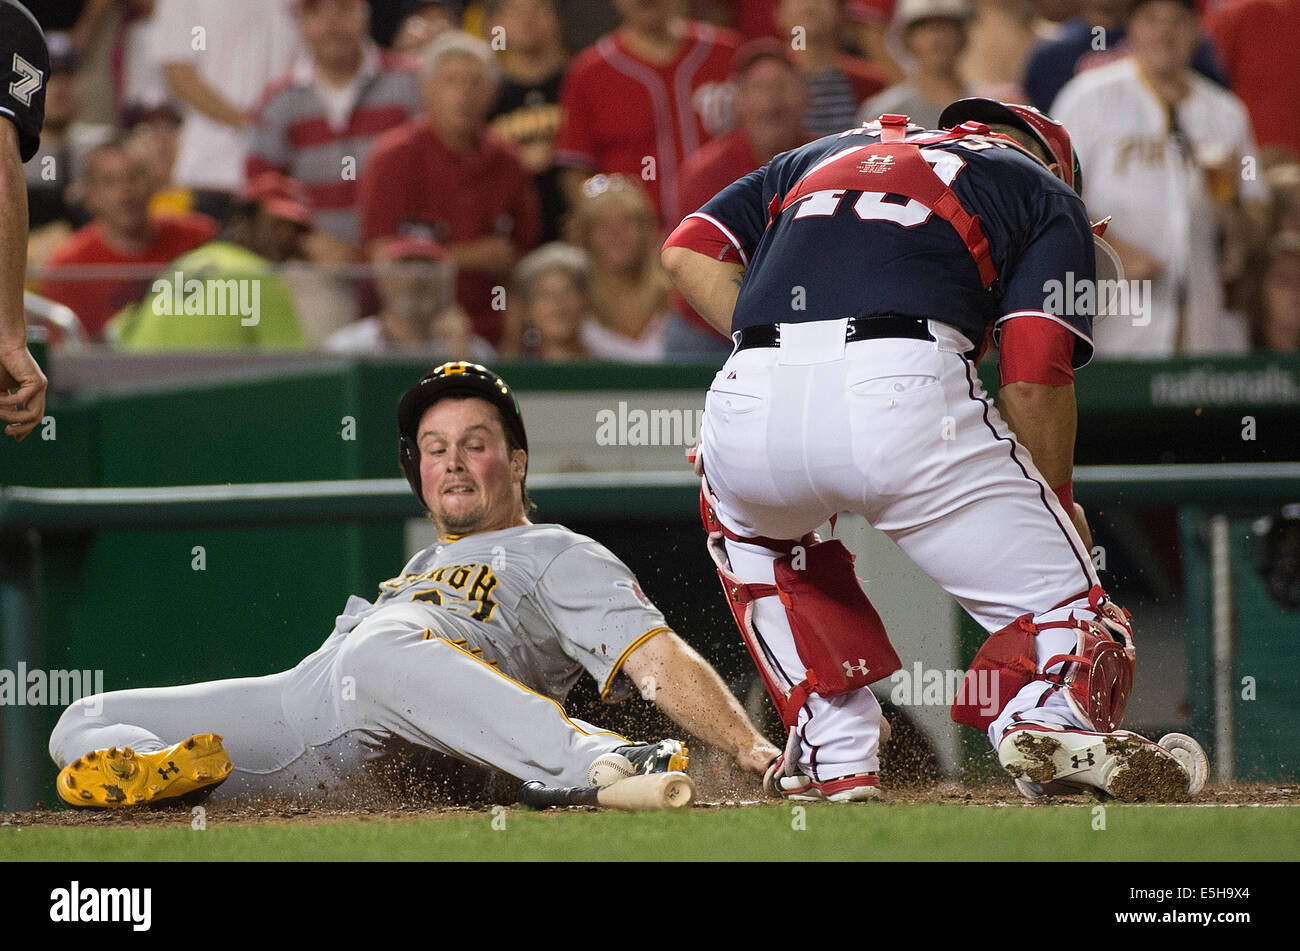 Washington DC, USA. 15th Aug, 2014. Pittsburgh Pirates right fielder Travis Snider (23) is safe at home plate as Washington Nationals catcher Wilson Ramos (40) can handle the throw during the fourth inning of their game at Nationals Park in Washington, D.C, Friday, August 15, 2014. Credit:  Harry Walker/Alamy Live News Stock Photo